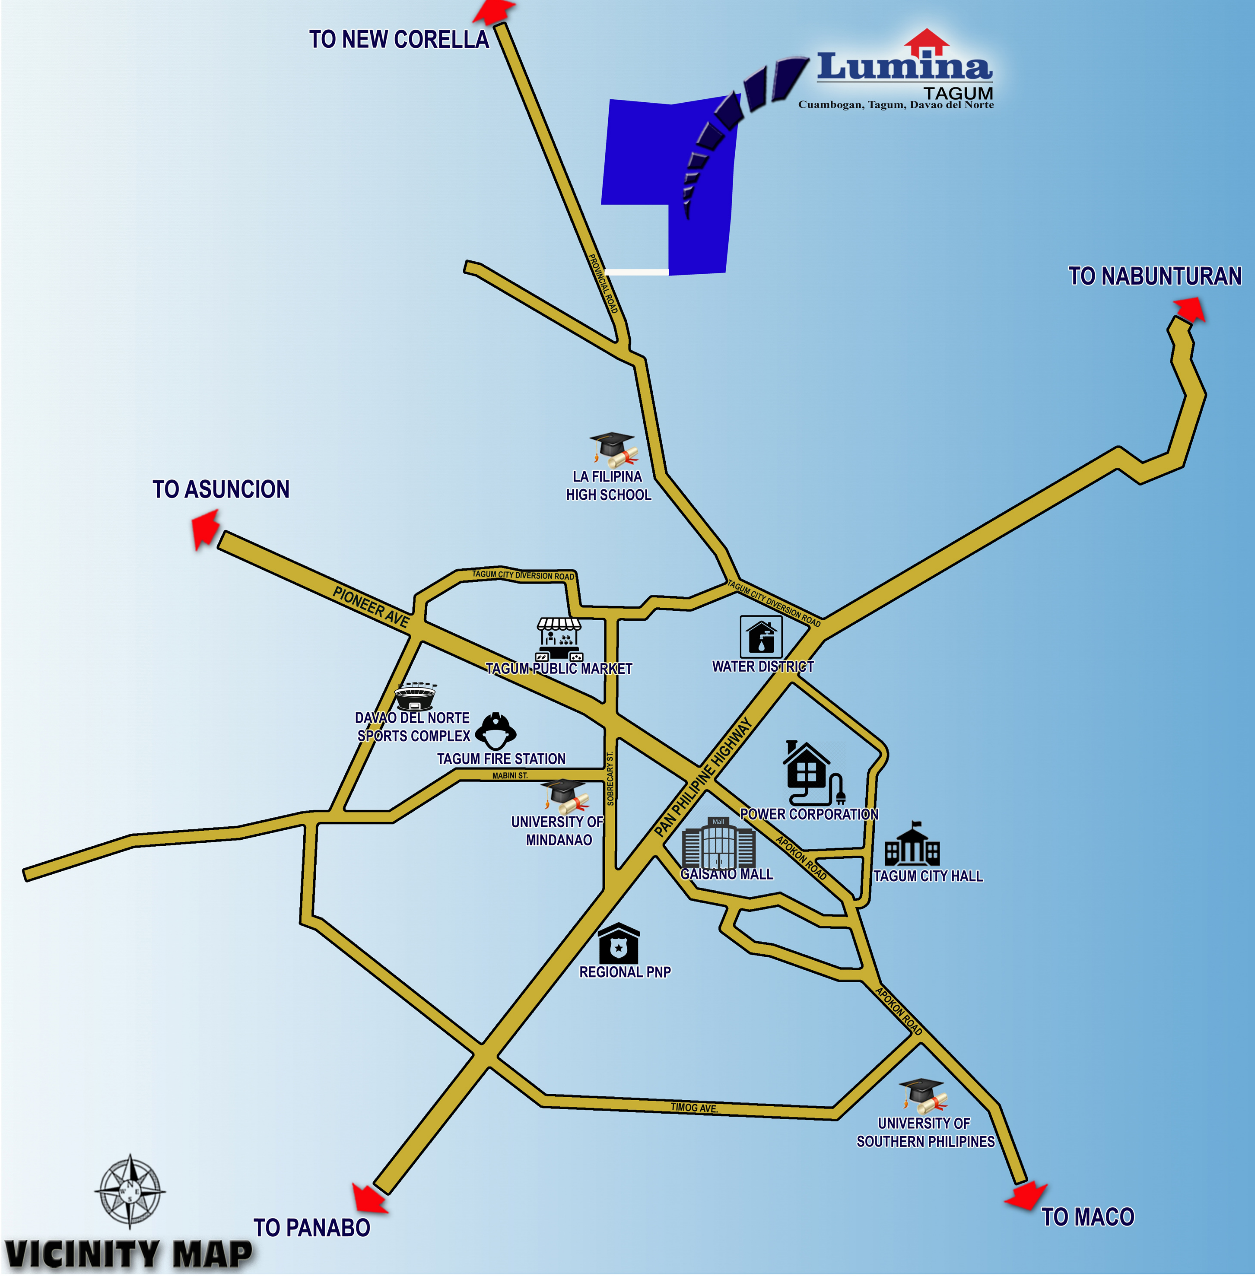 VICINITY-MAP-1635821804.png